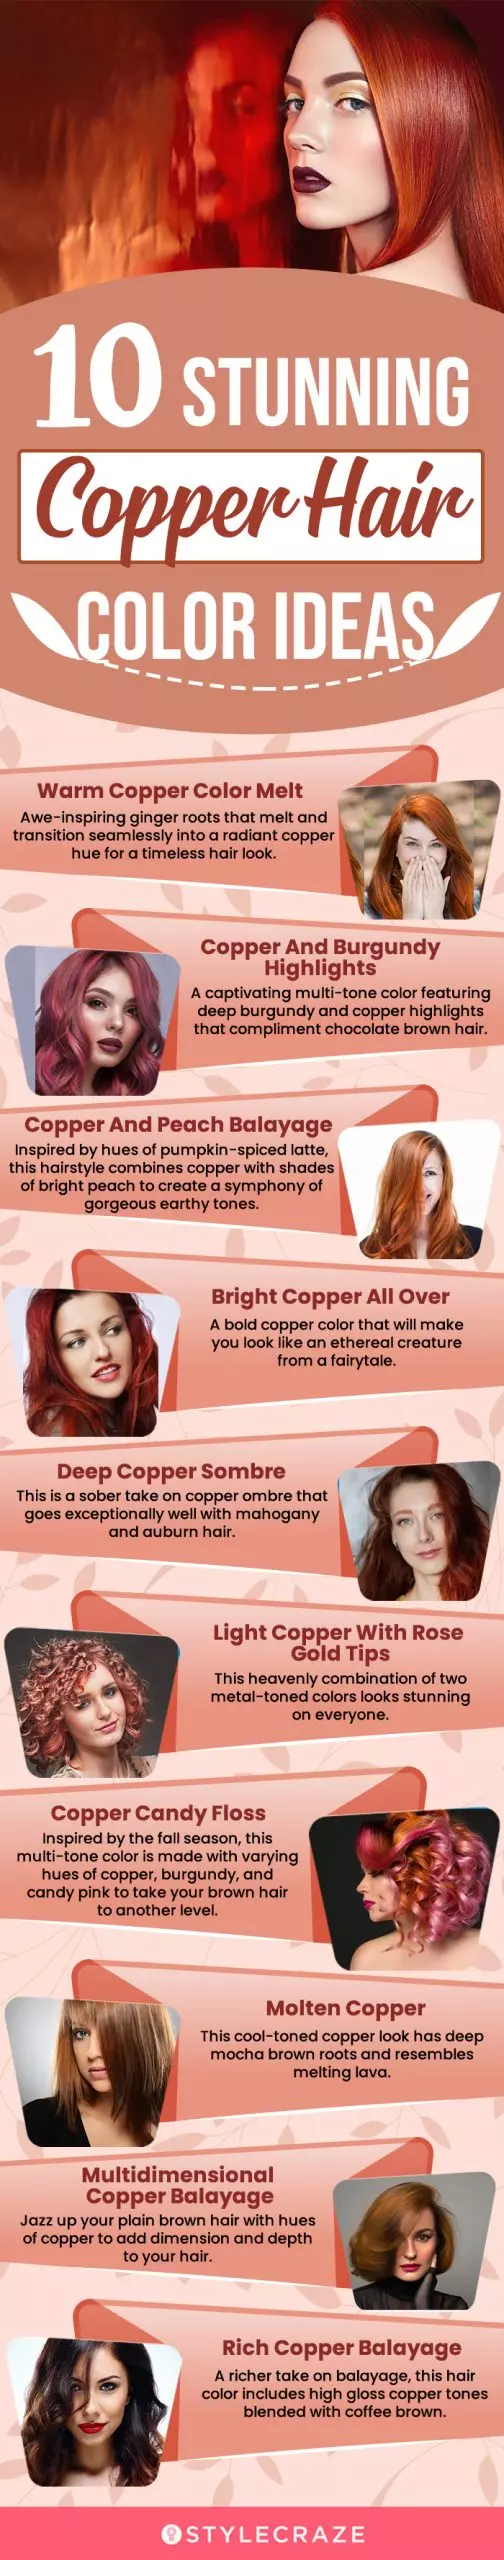 10 stunning copper hair color ideas (infographic)